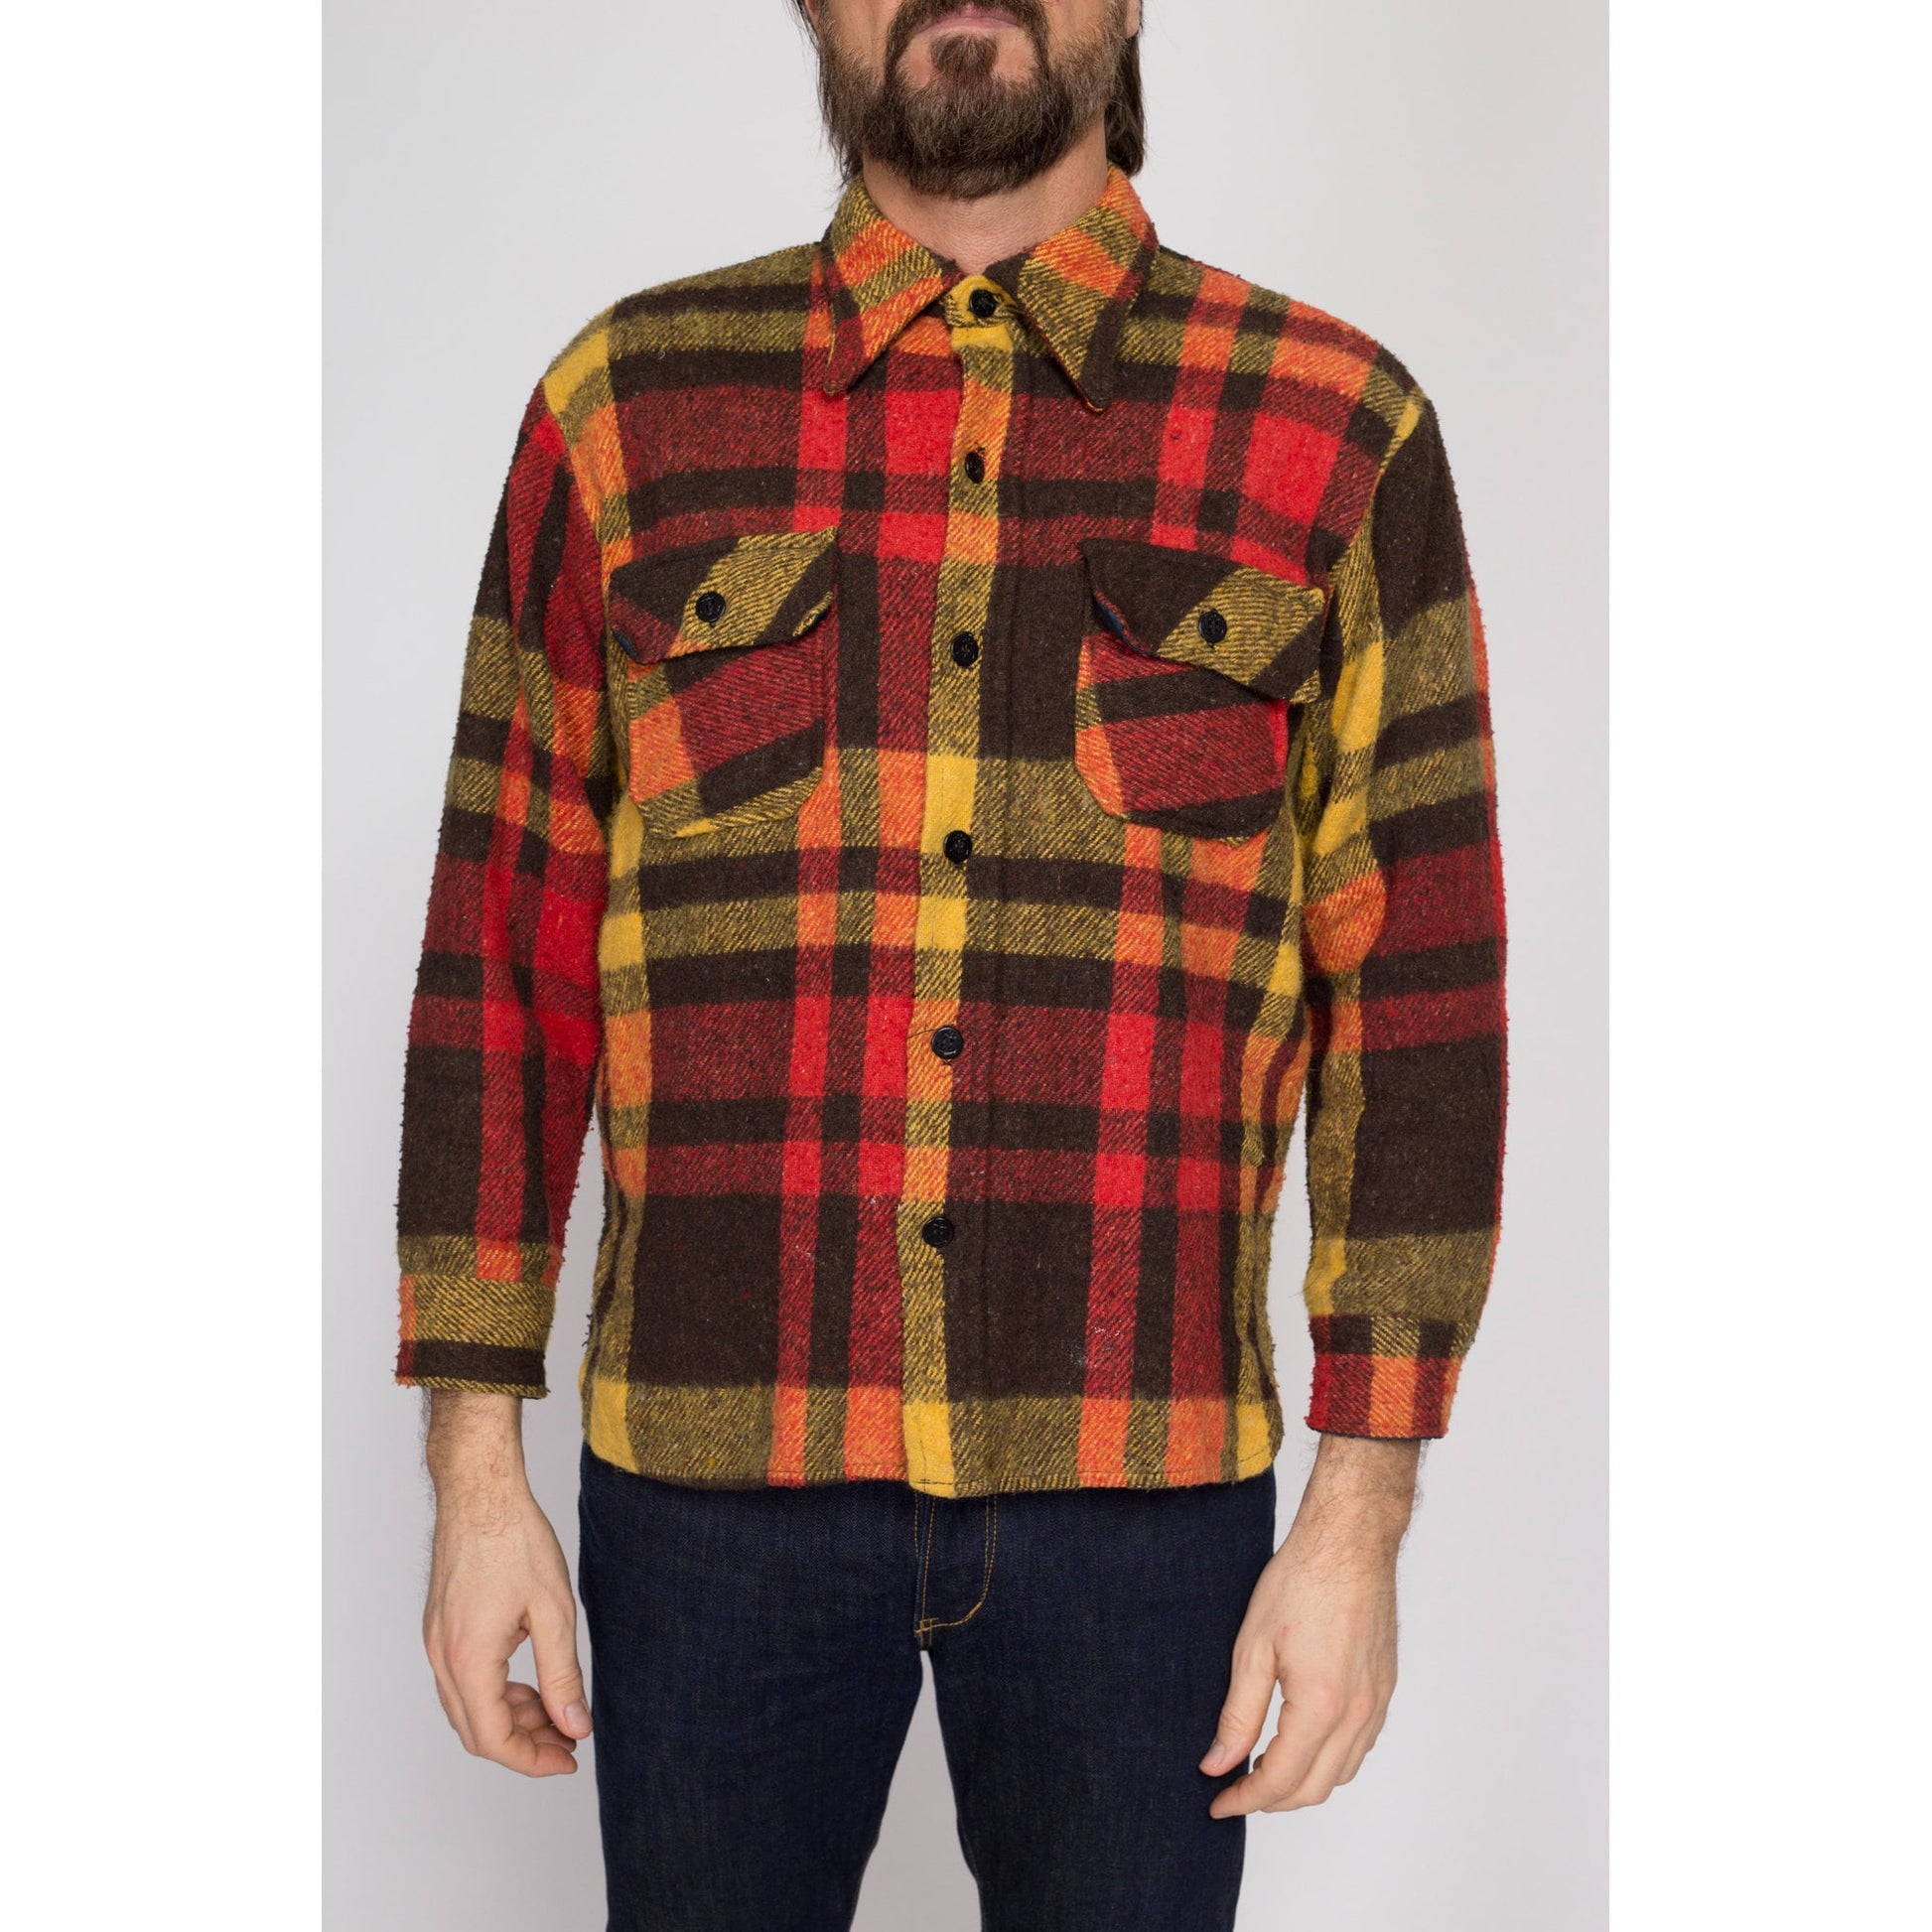 Medium Short 70s Red & Yellow Plaid Flannel Overshirt | Vintage Button Up Collared Shacket Shirt